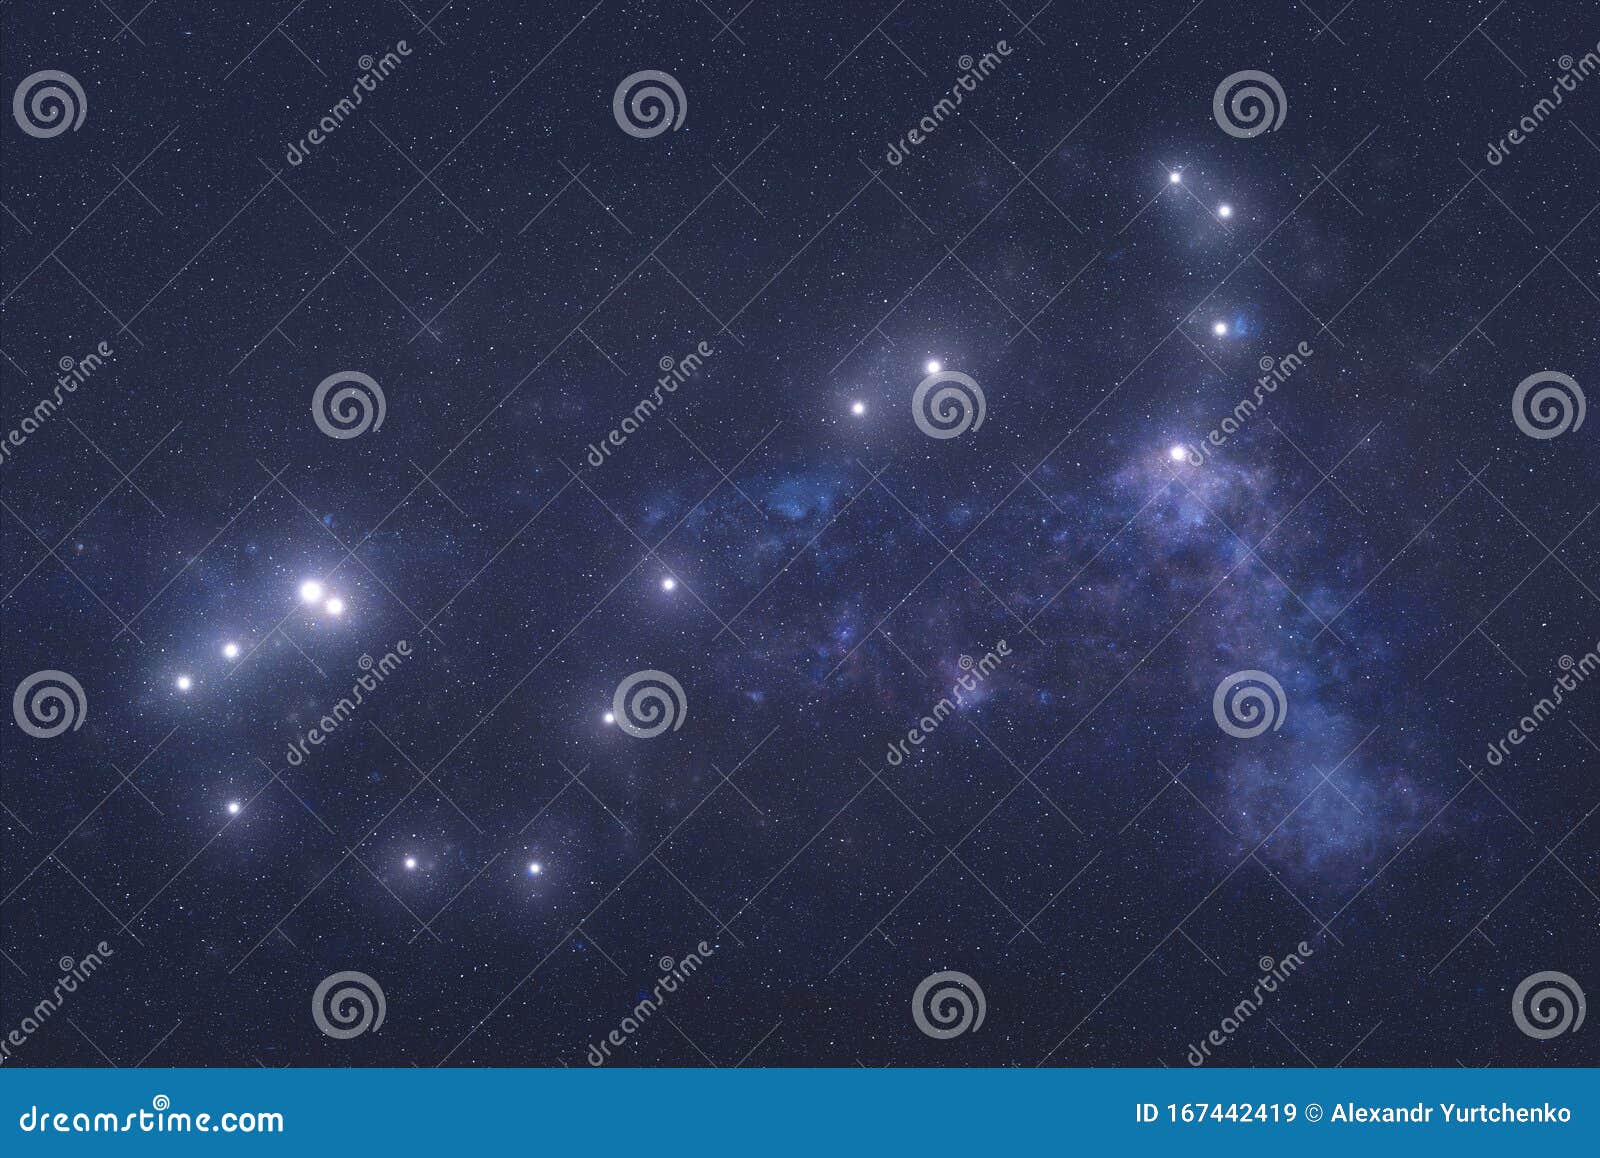 scorpio constellation in outer space